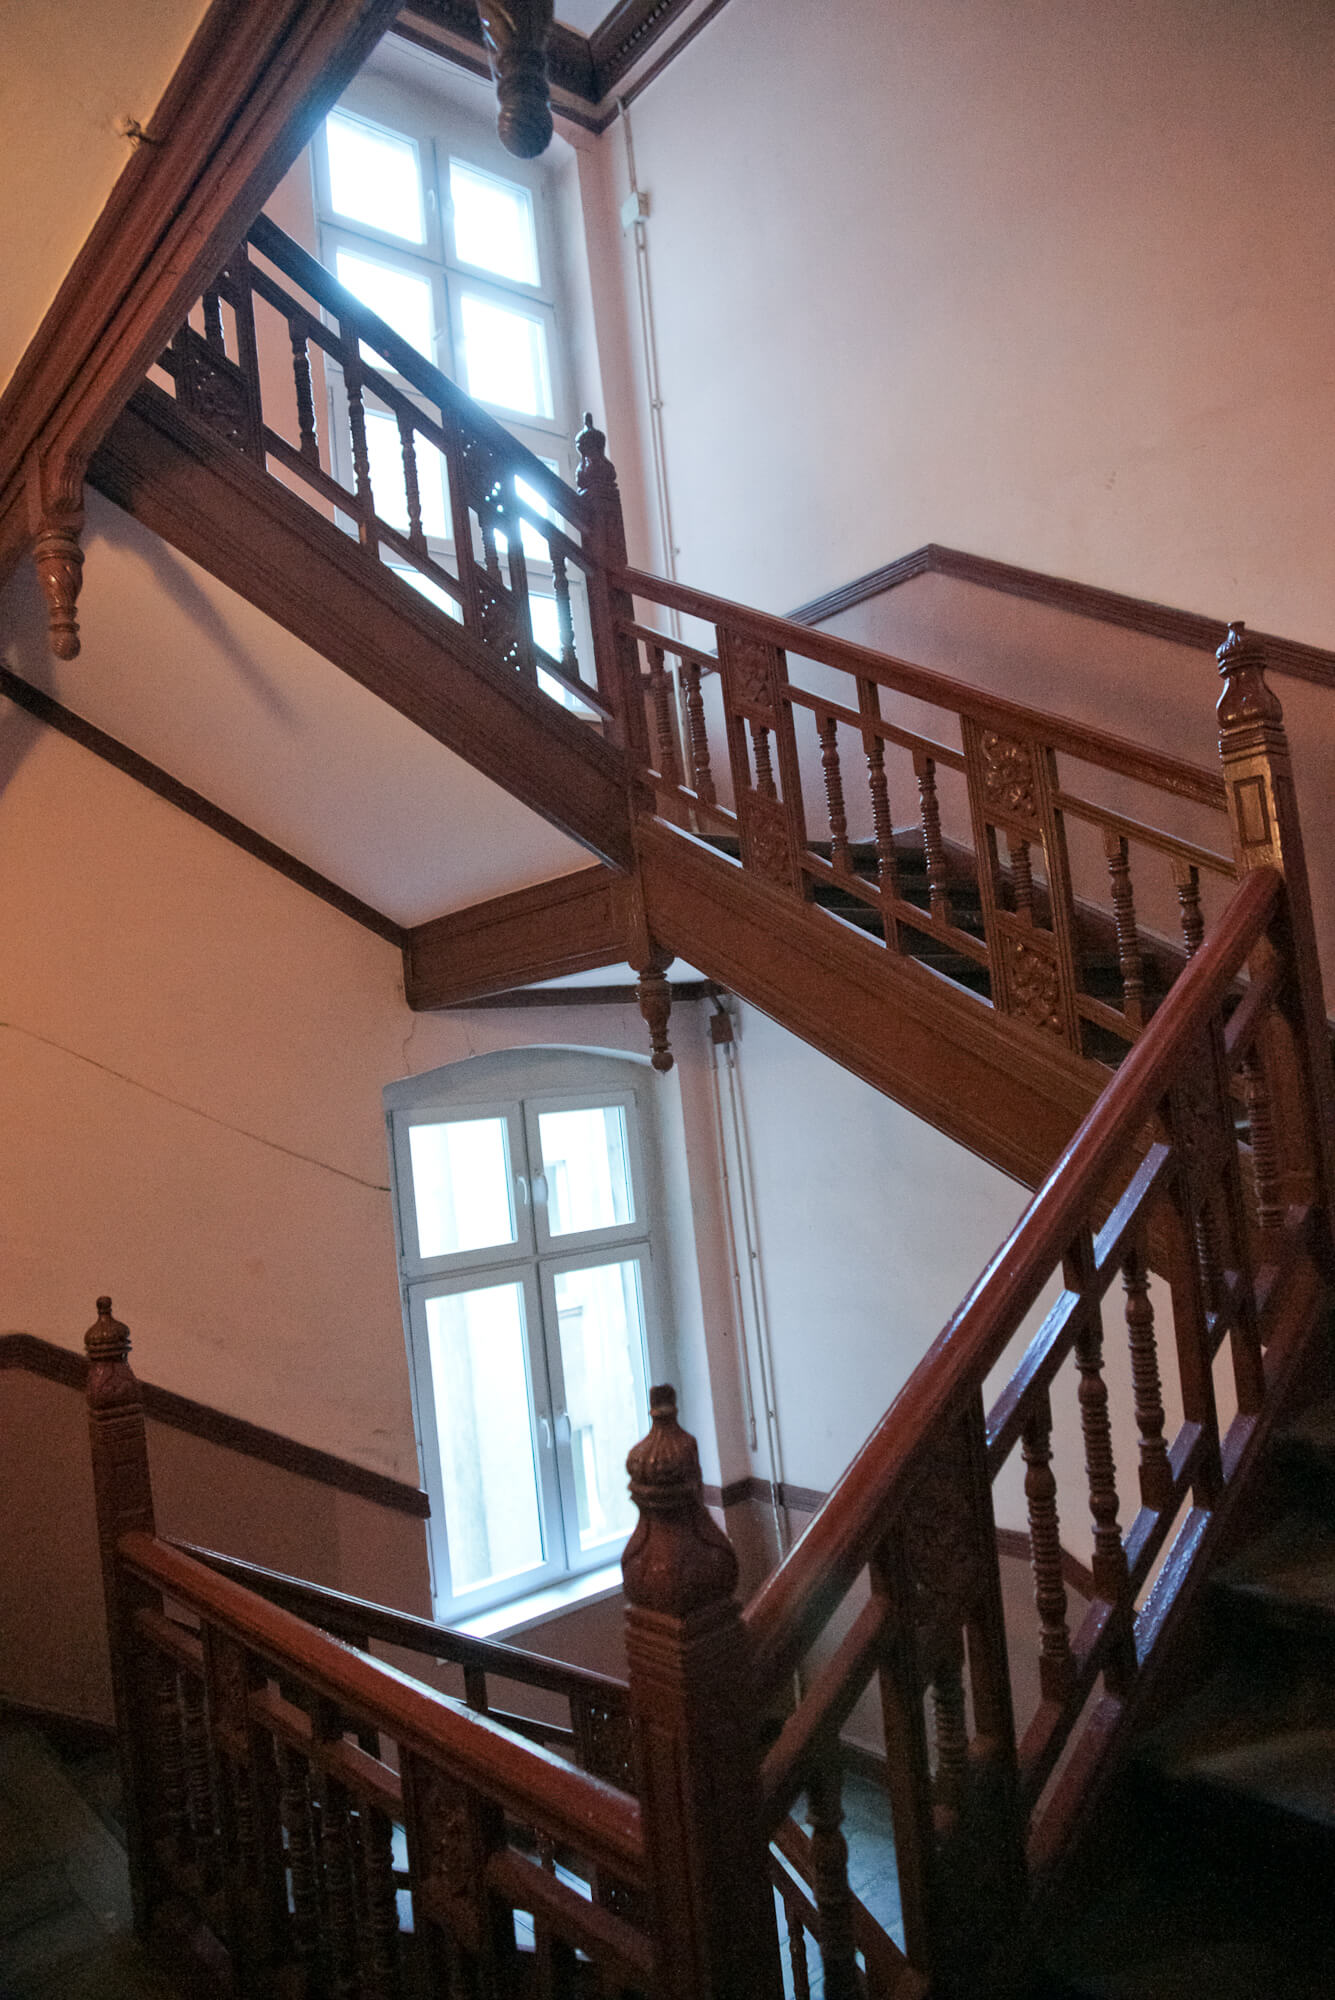 6. Staircase 2